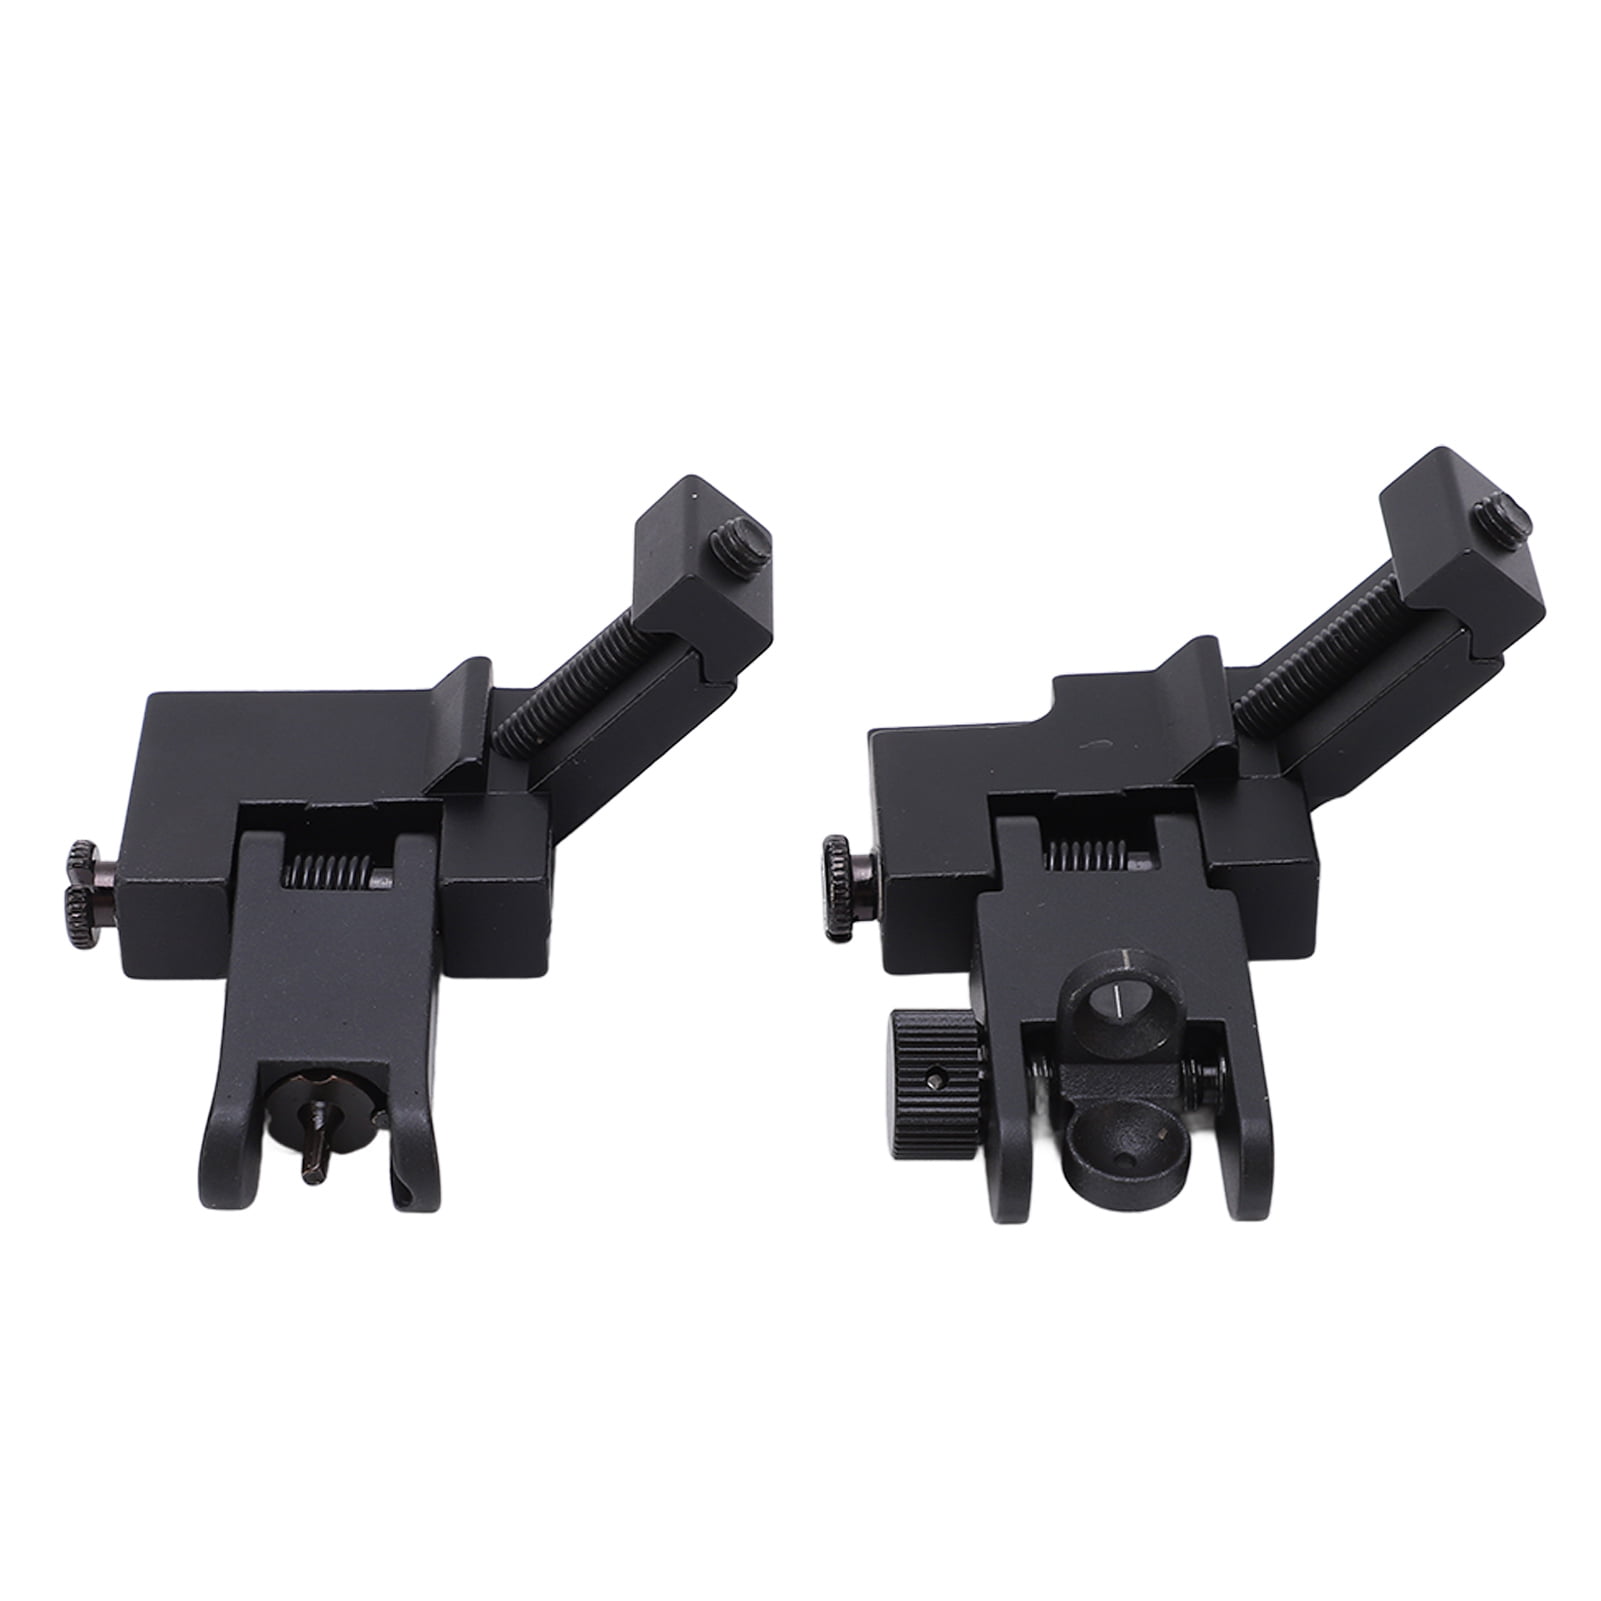 Aluminum 45 Degree Offset Flip Up Front and Rear Rapid Transition Backup Sight 